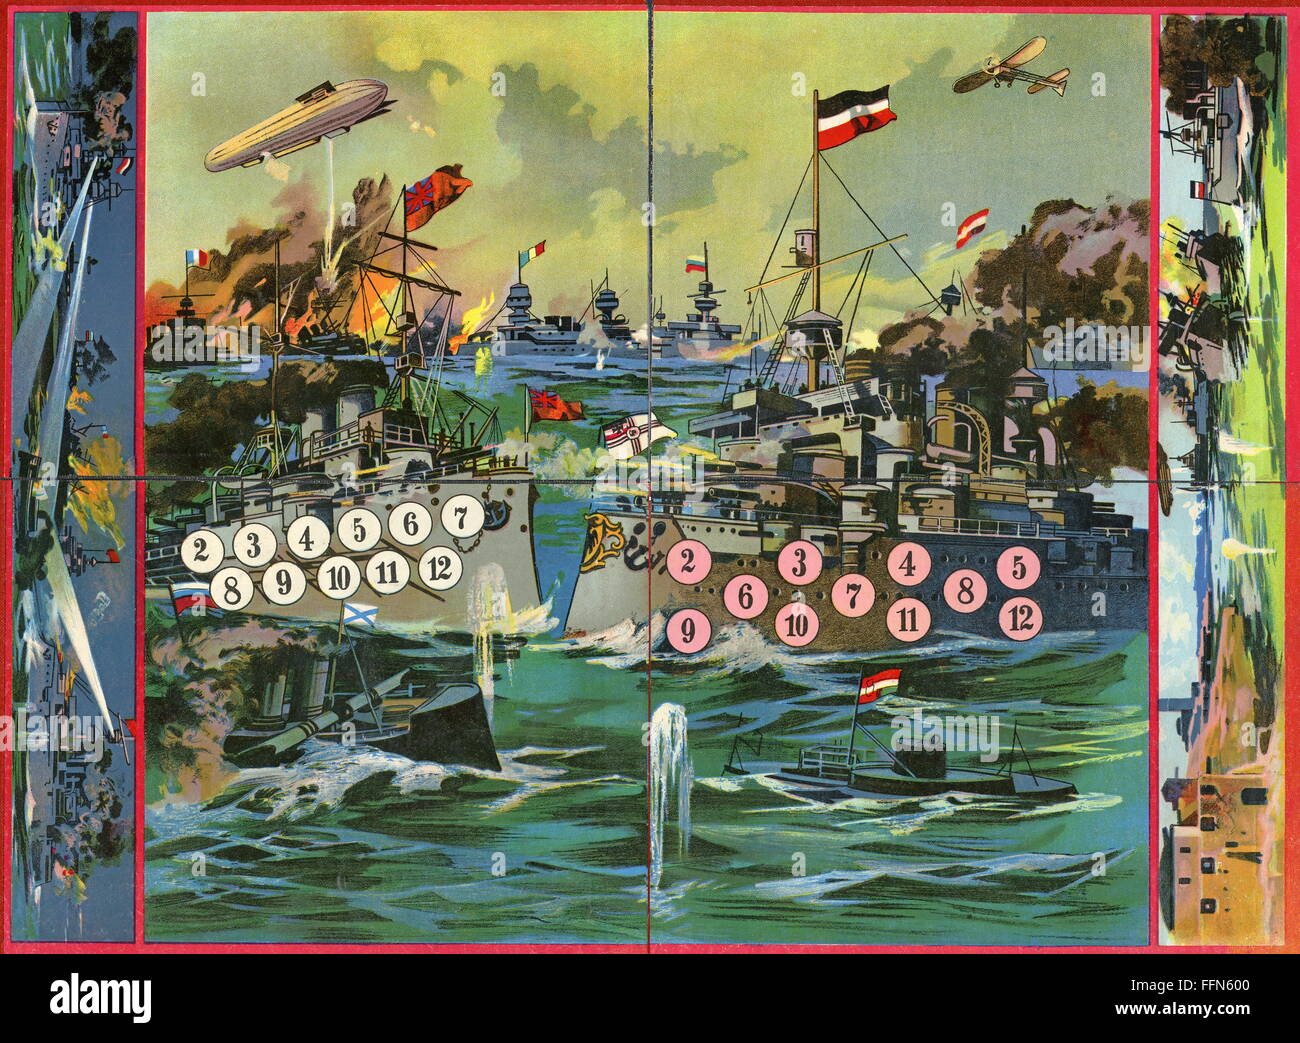 First World War / WWI,Germany,patriotic board game about the beginning of the first world war,lithograph,1915,game of dice,games of dice,war game,war games,battle game,naval battle,naval battles,warship,warships,battleship,battleships,submarine,submarine boat,U-boat,submarines,submarine boats,U-boats,German,Germans,fleet,fleets,illustration,military history,fighting,fight,operation,action,naval war,naval wars,aerial warfare,gaming,party games,party game,board,boards,Germans fighting against English fleet and their allies,,Additional-Rights-Clearences-Not Available Stock Photo